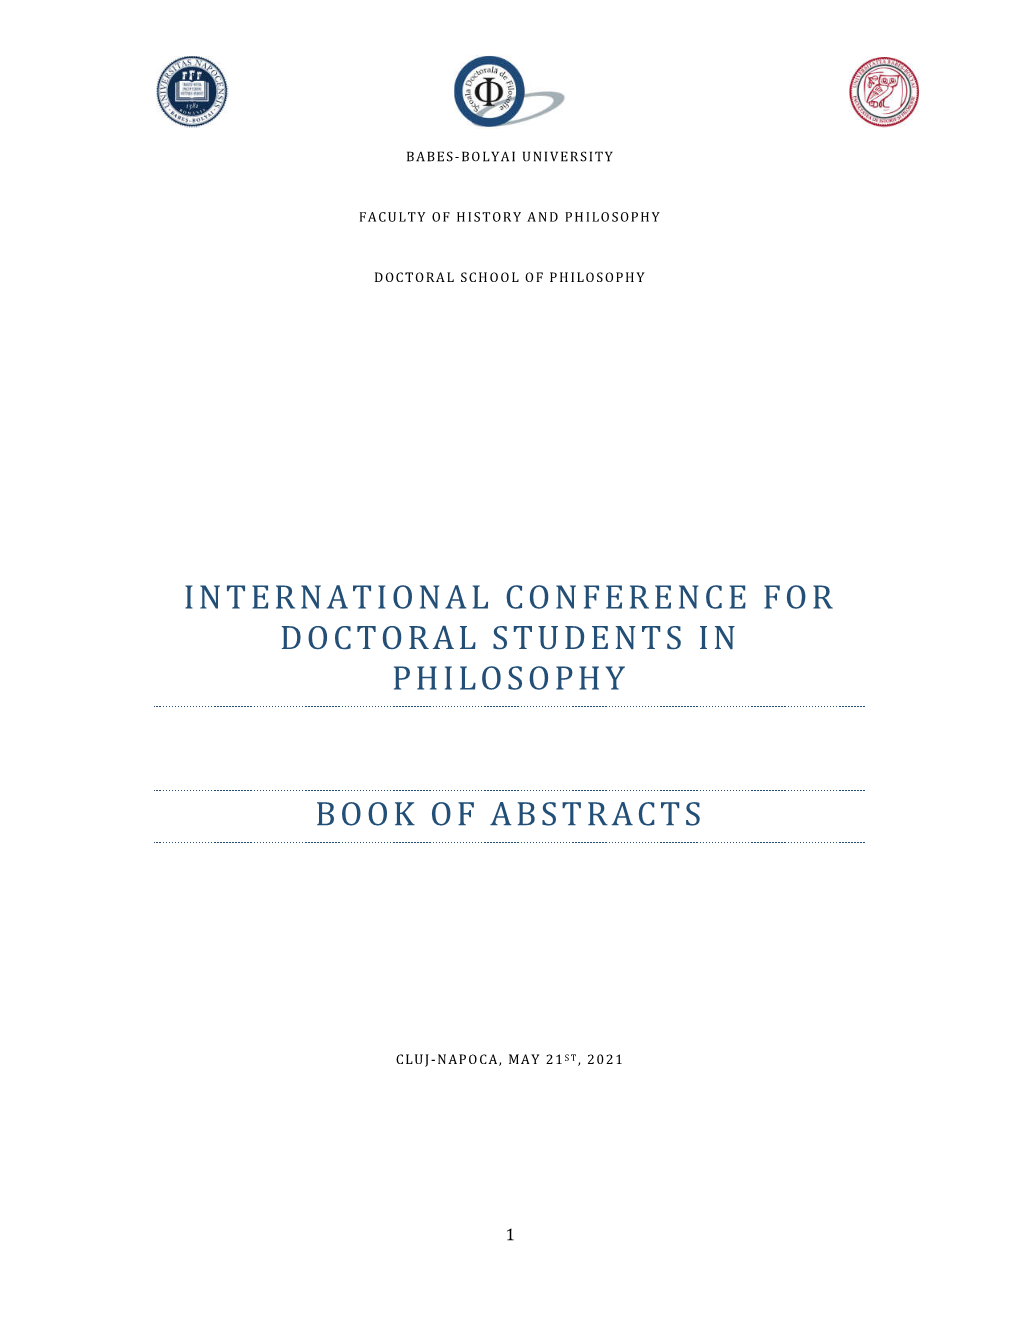 International Conference for Doctoral Students in Philosophy